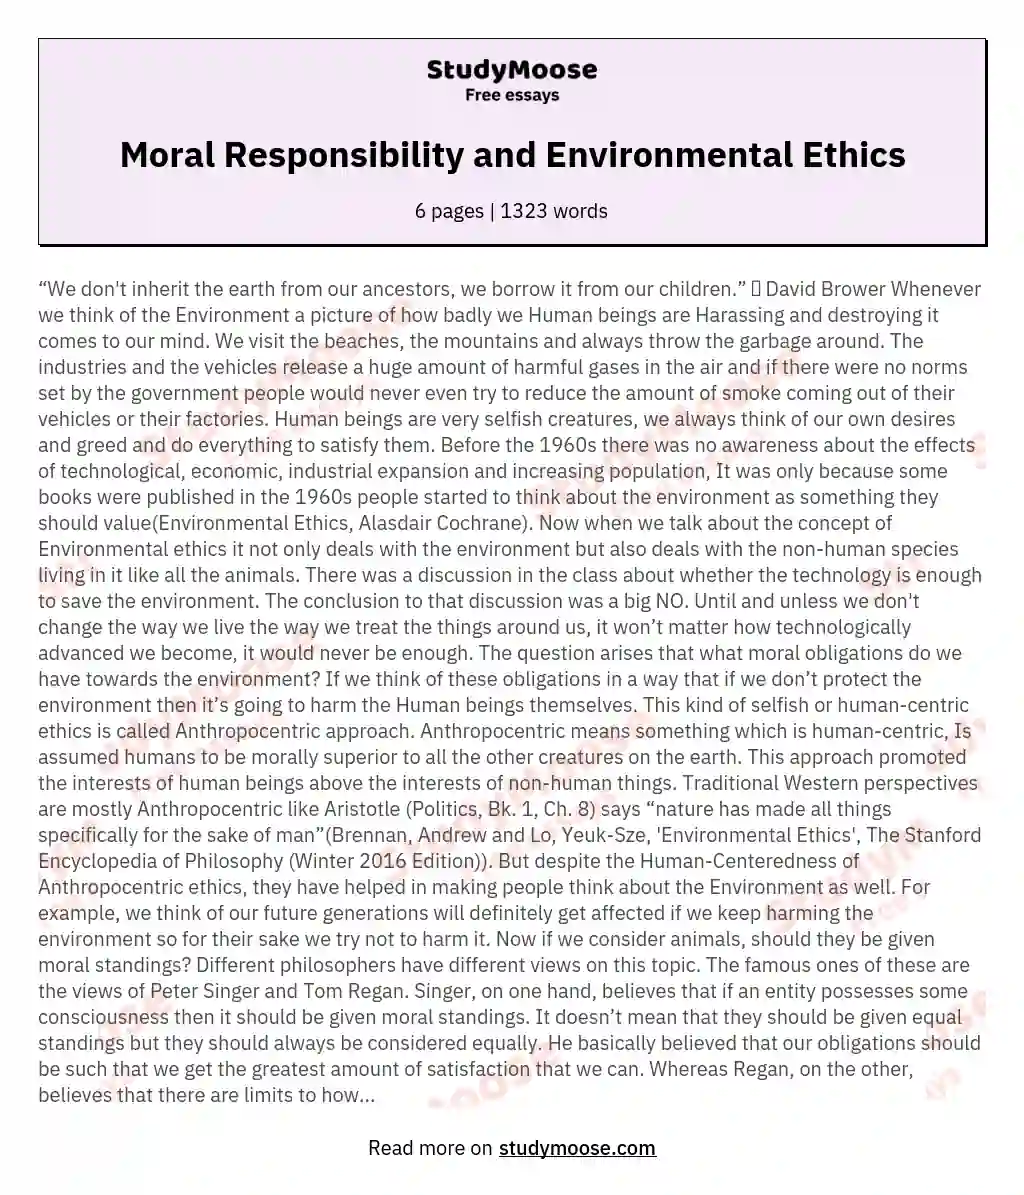 Moral Responsibility and Environmental Ethics